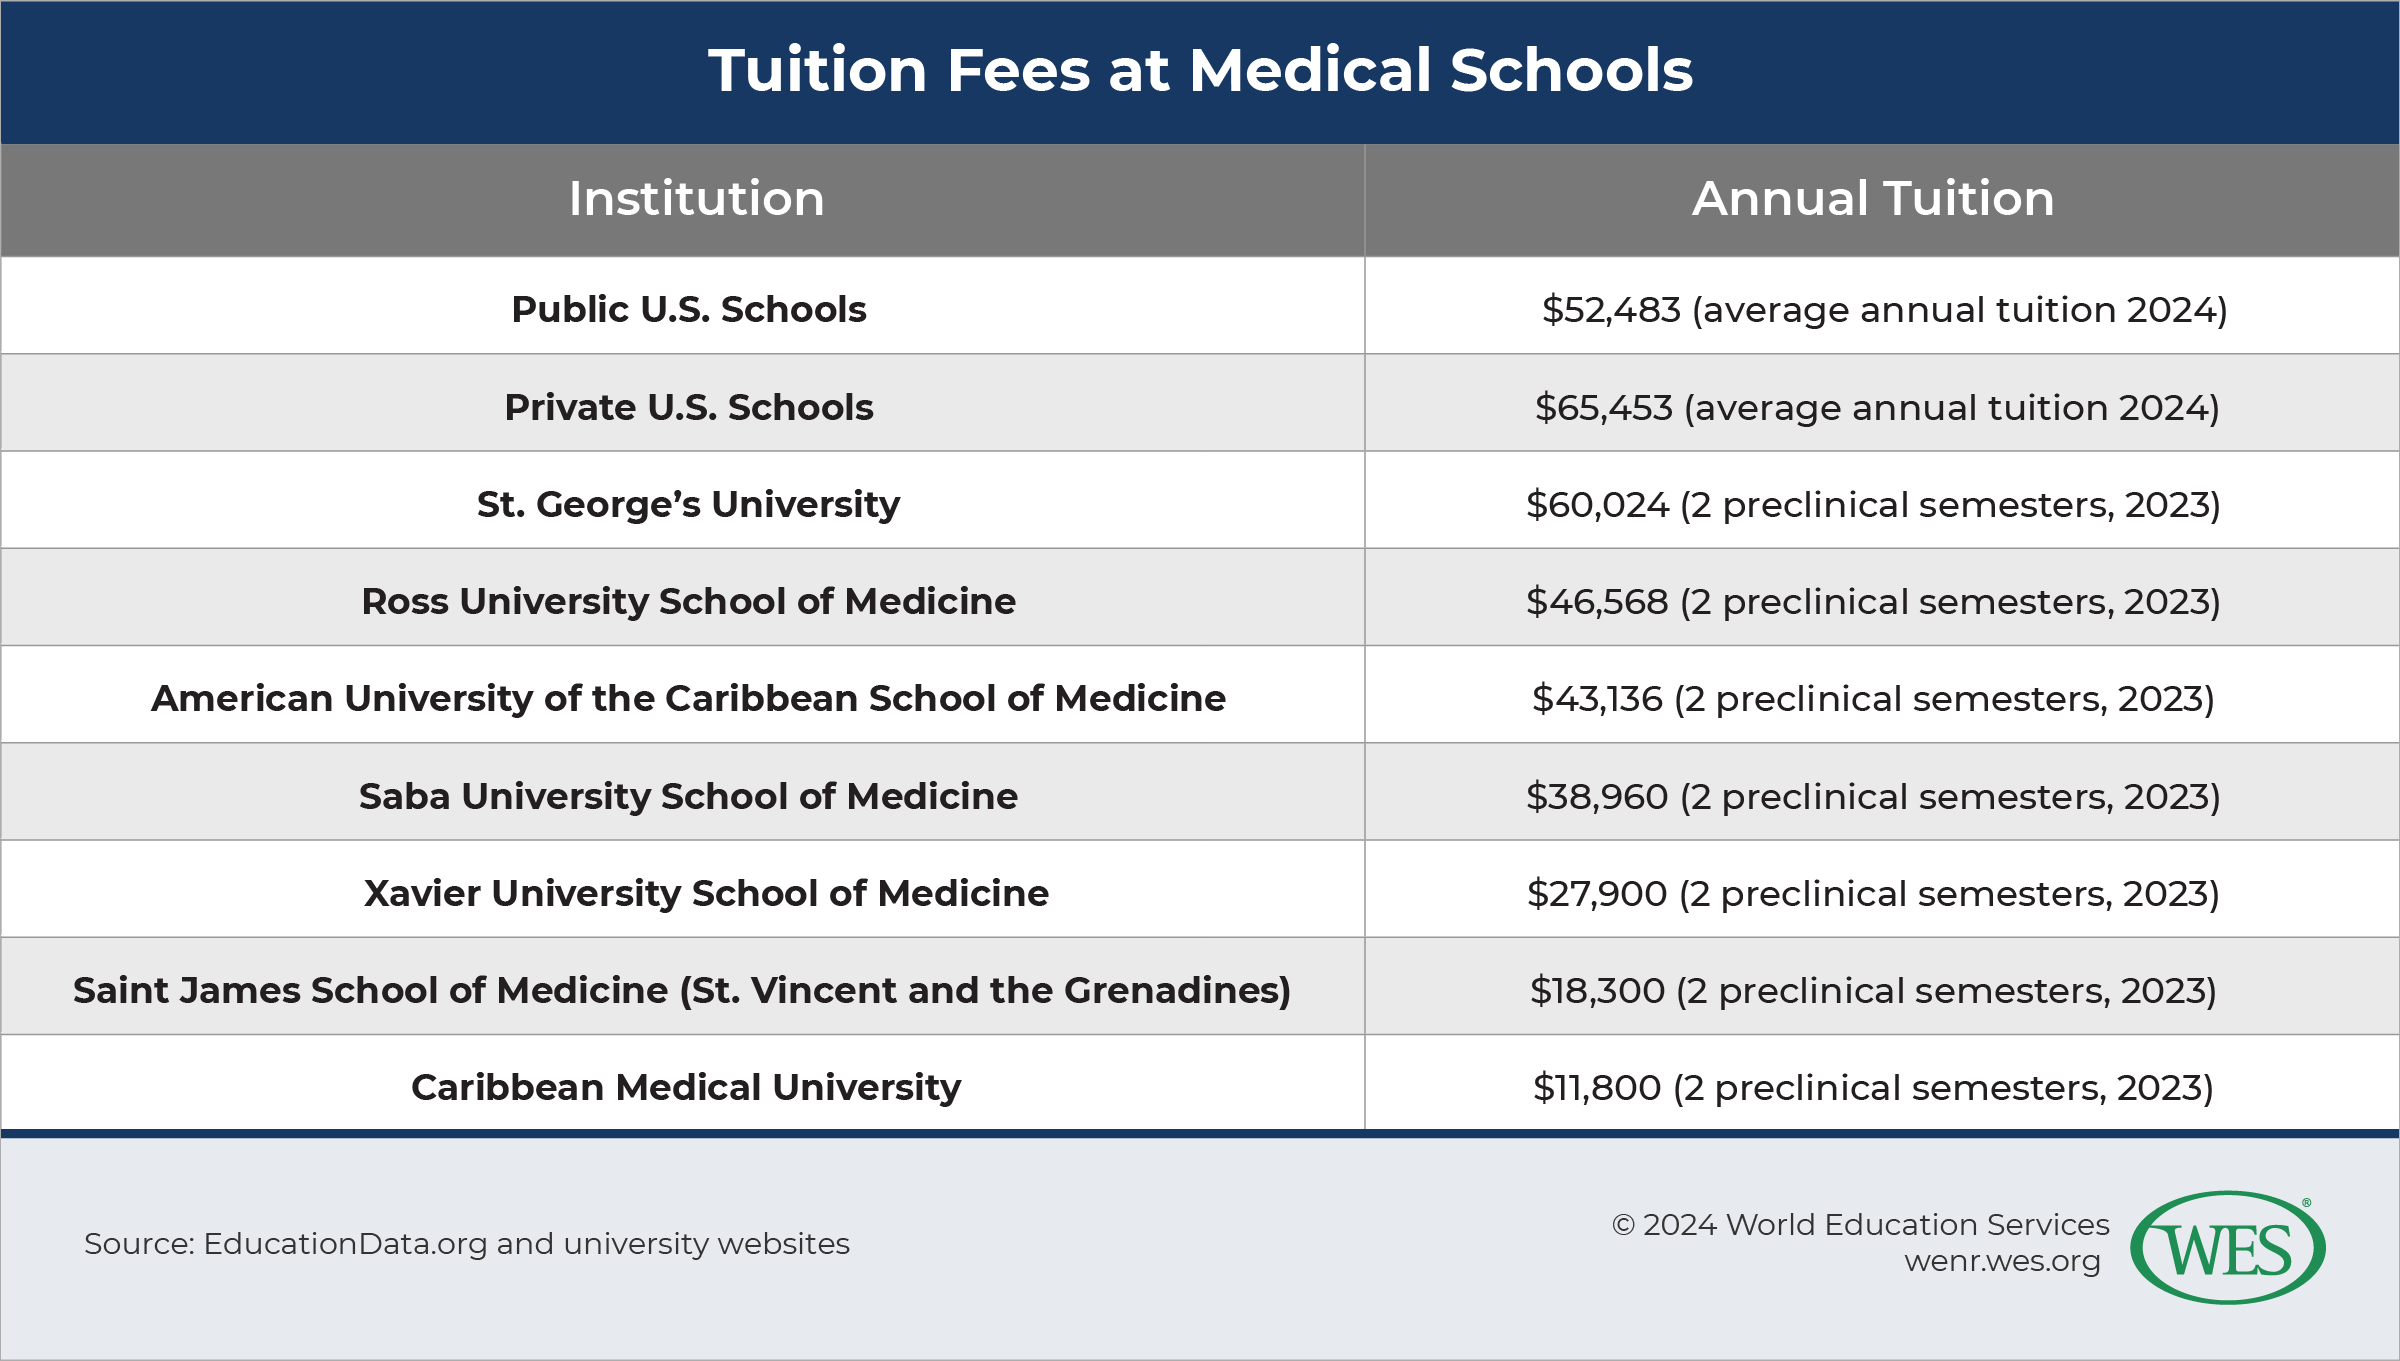 A table listing annual tuition fees at select medical schools in the U.S. and Caribbean. 